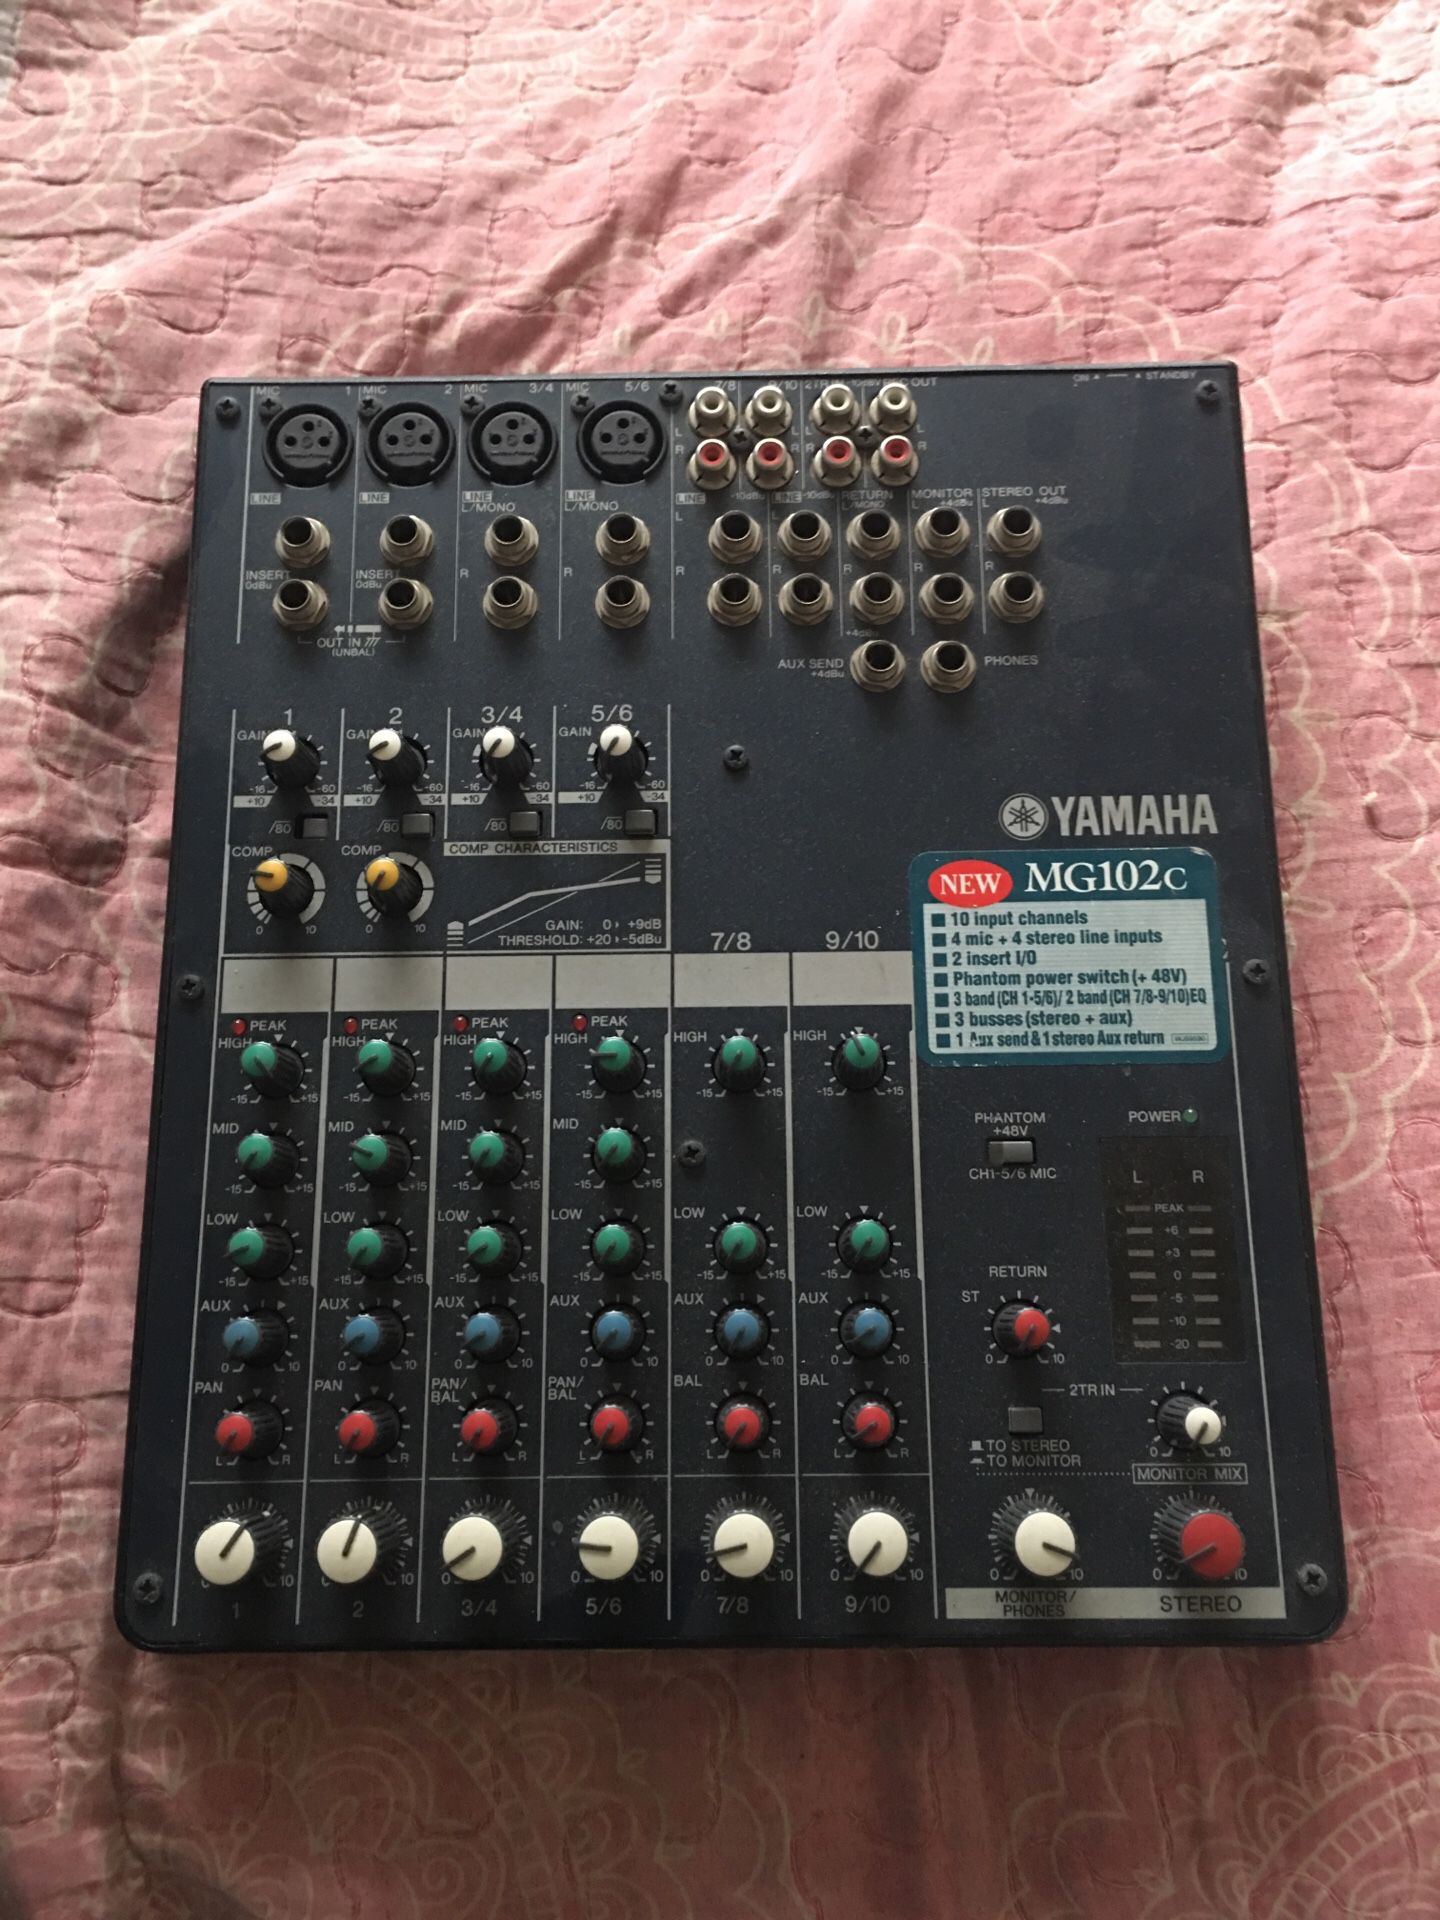 Yamaha MG102c for Sale in New York, NY - OfferUp